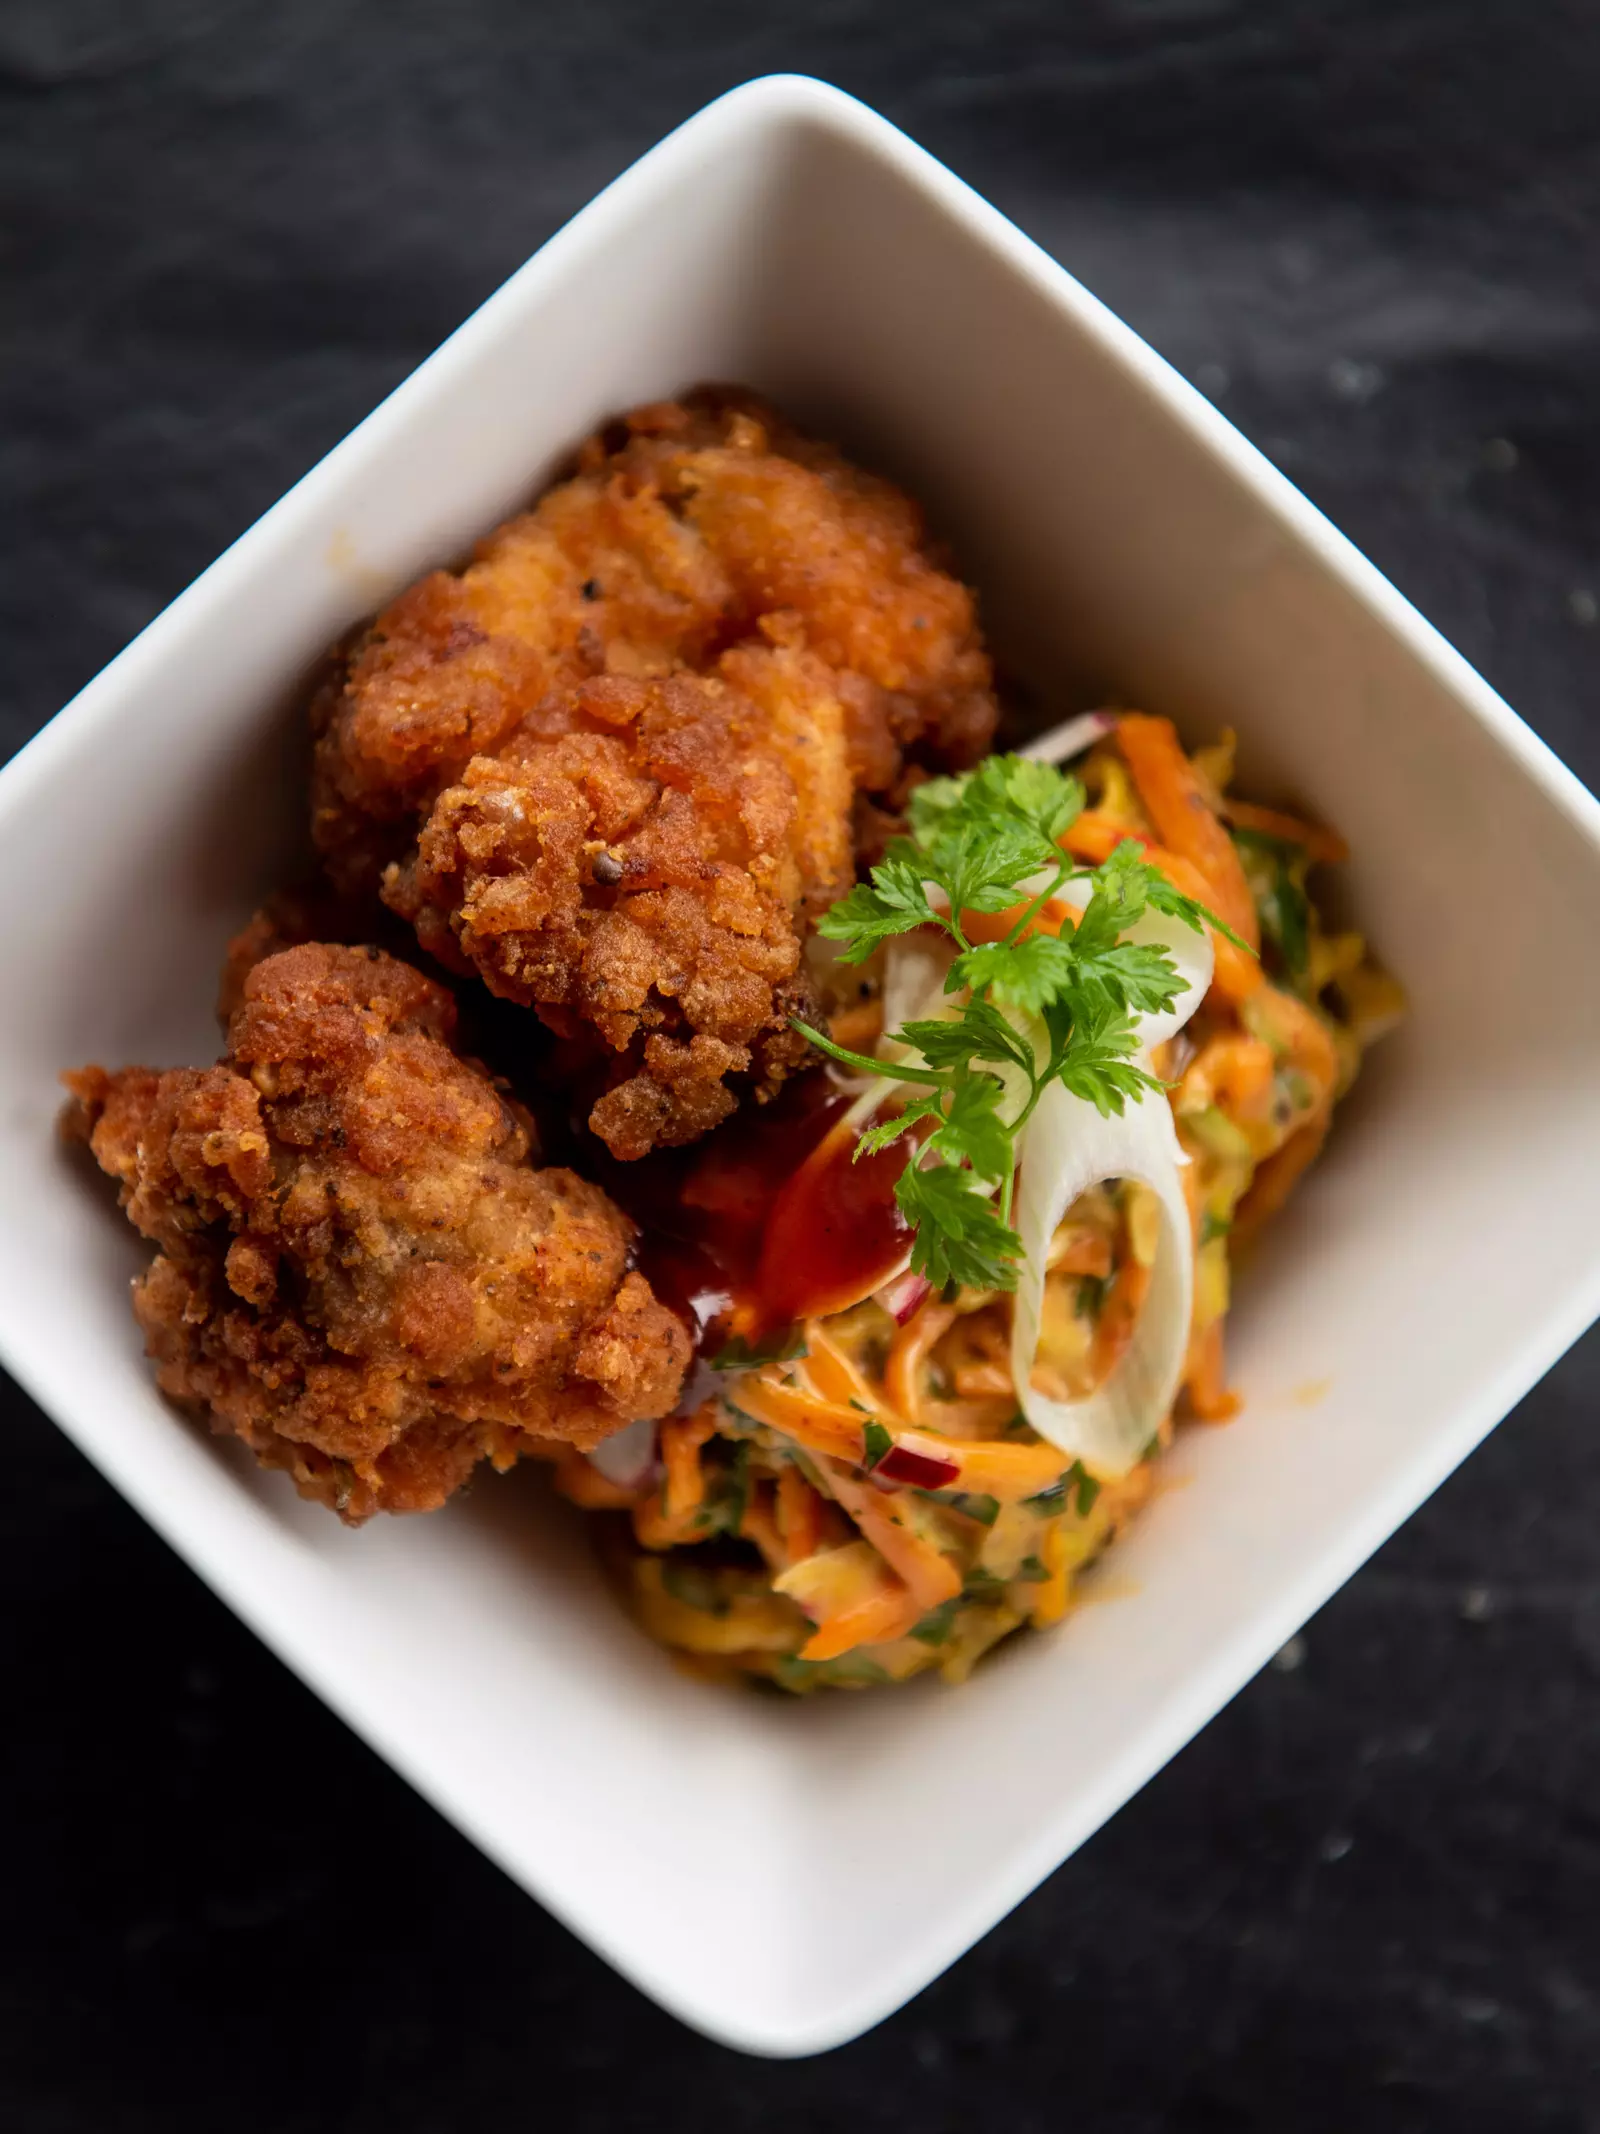 A fried chicken dish served in a bowl on a table with a fork